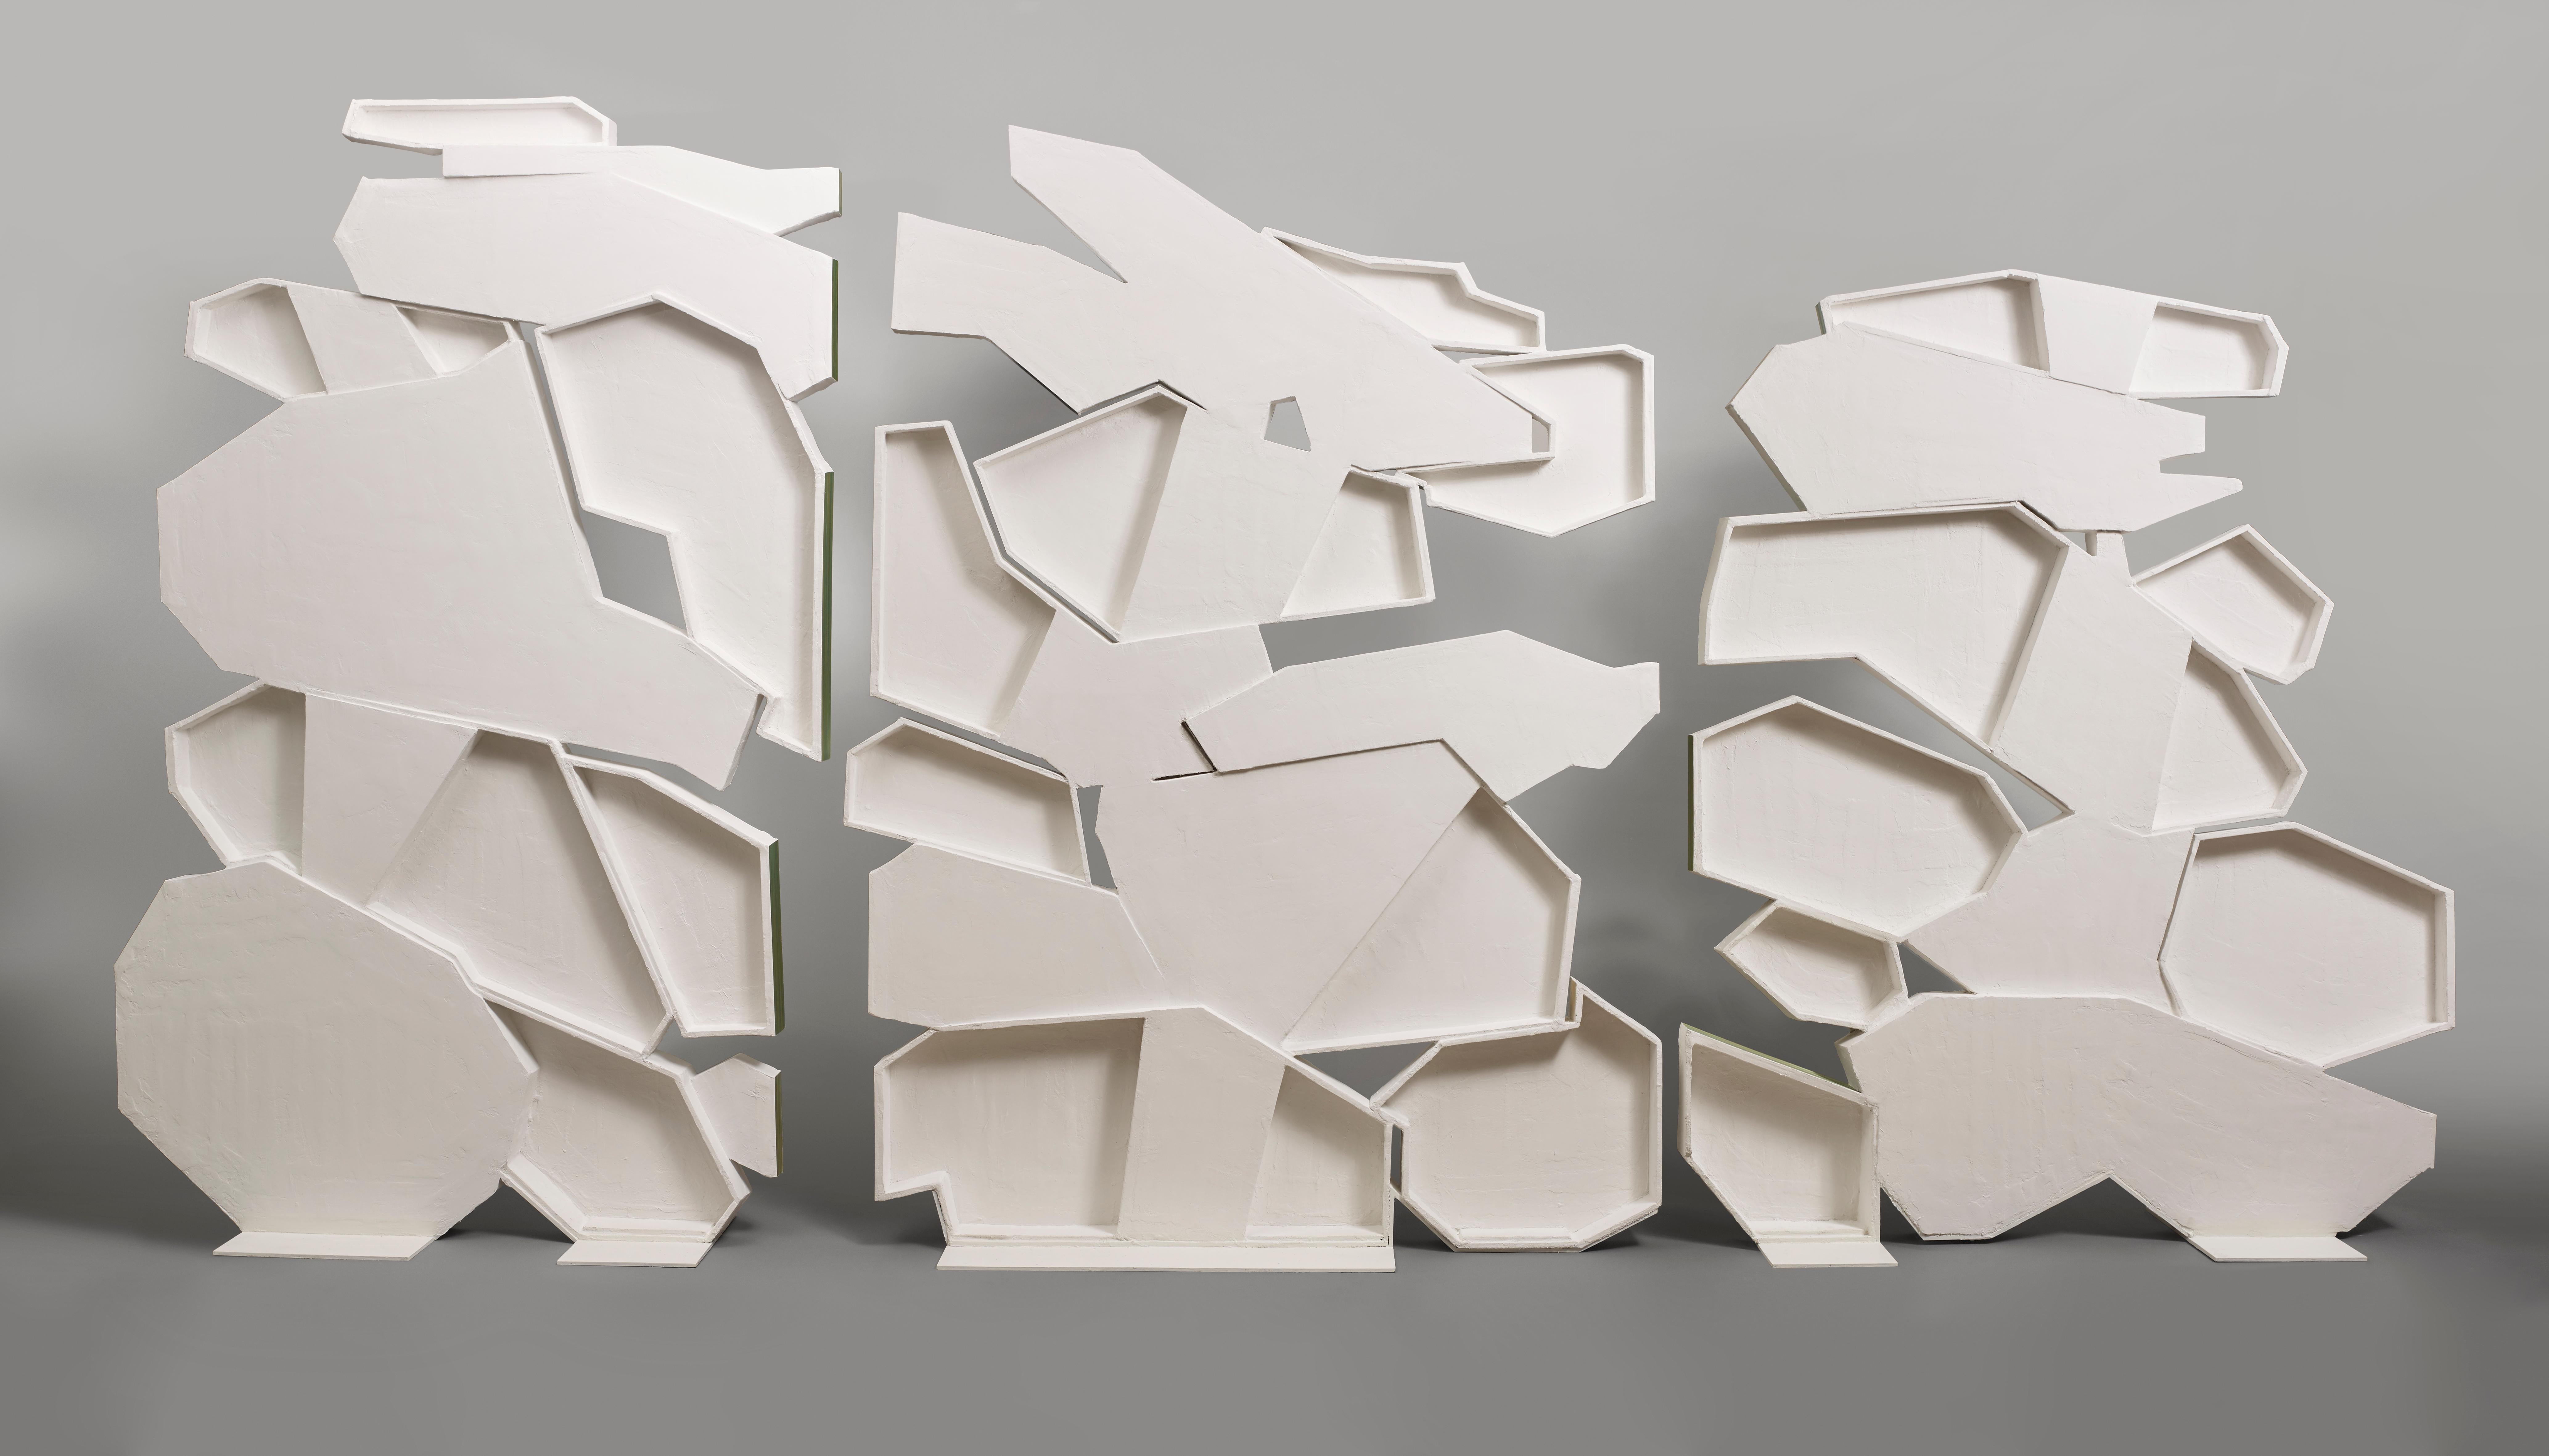 Franc¸ois Mascarello’s ‘Dynamic Landscape’ screen/room divider is five meters in length and composed of three freestanding panels that naturally interact, creating one unique piece. The dimensions of these panels are as follows: H 231 X L 160 X W 40